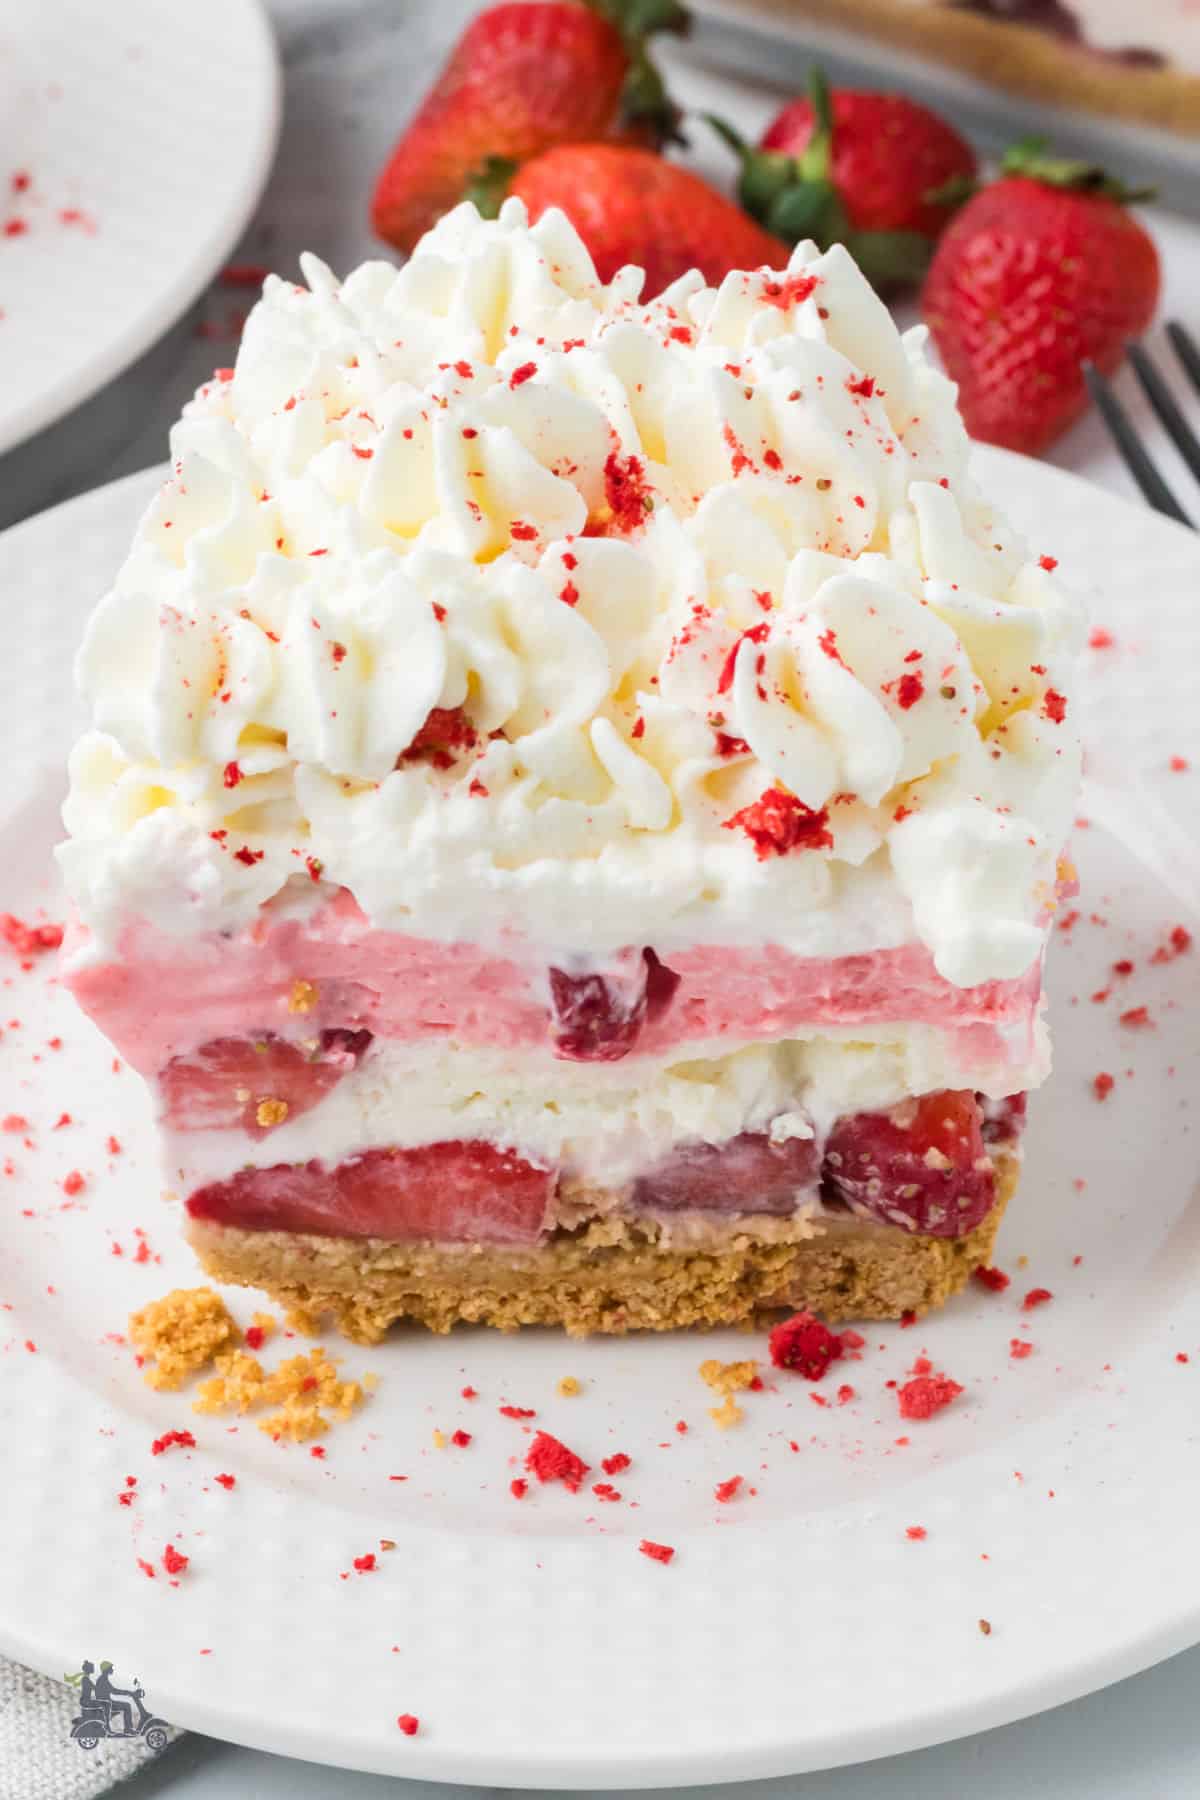 No-bake dessert made into four layers with graham crackers on the bottom, strawberries on top of the crust, and whipped strawberry cream in the middle.